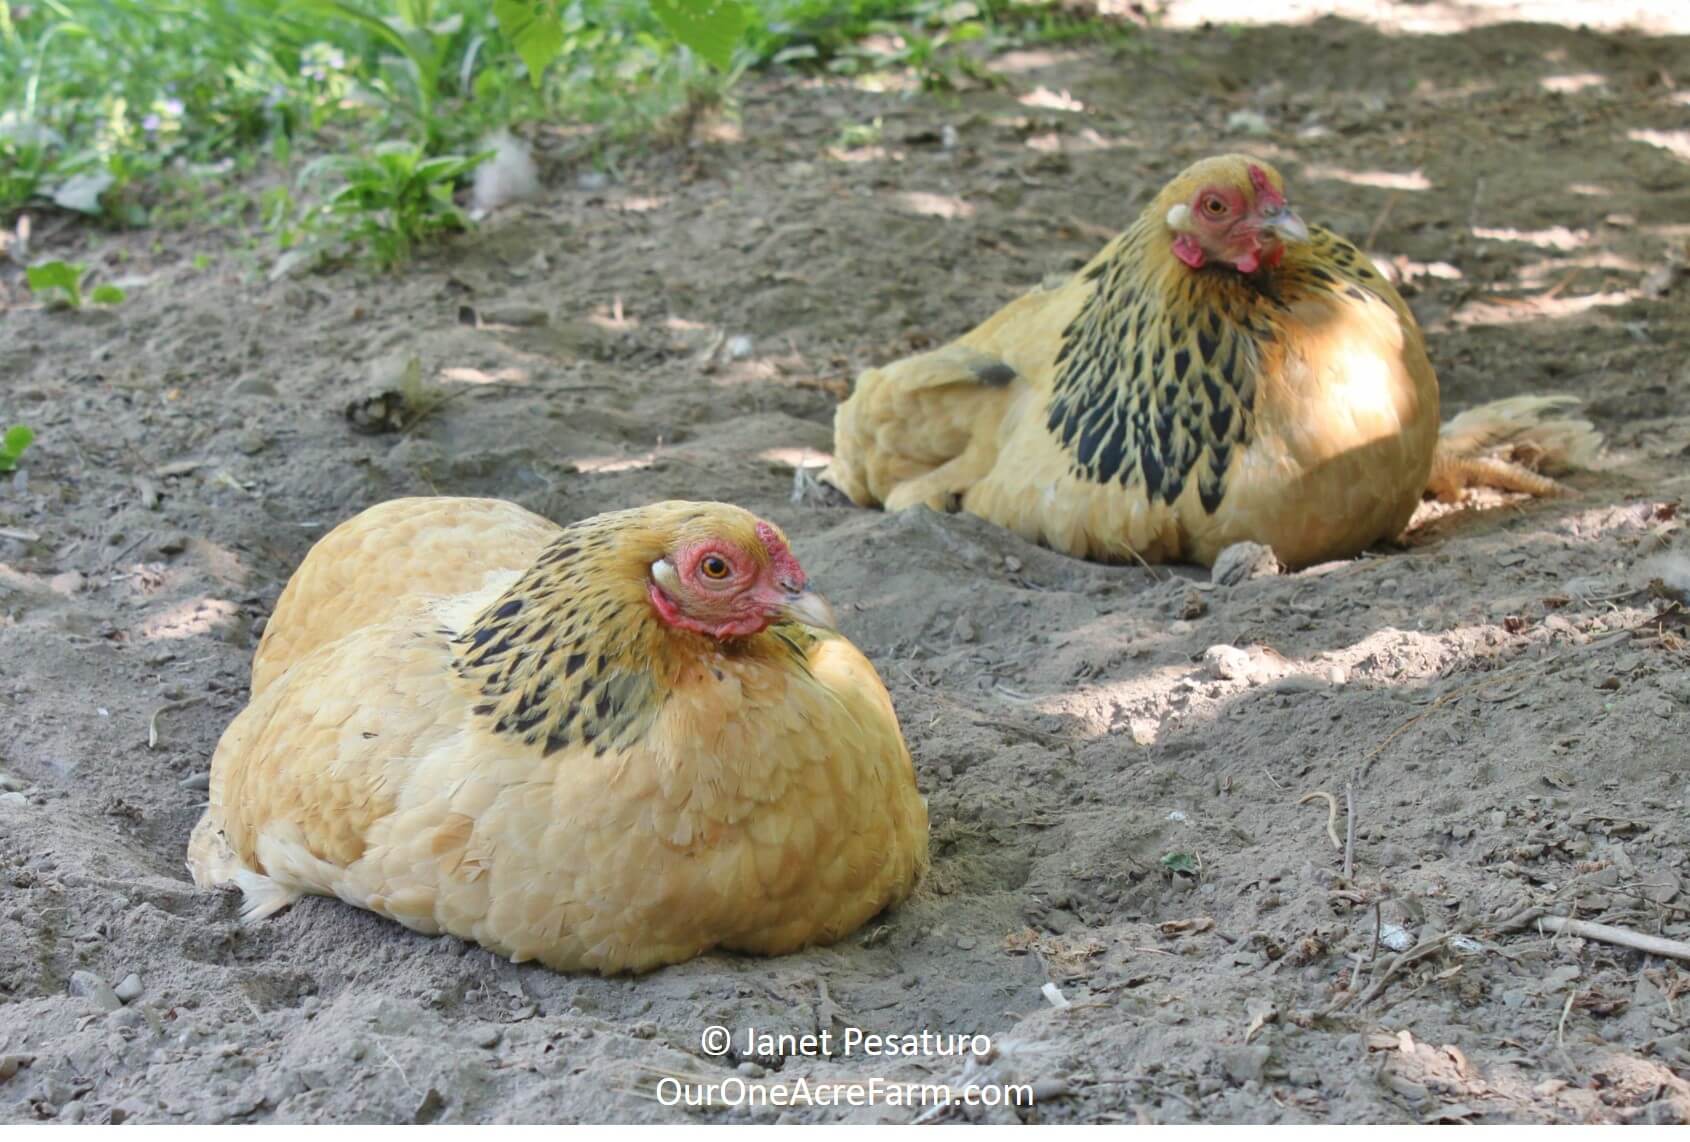 Can free-range chickens hunt their own food or do they need to be